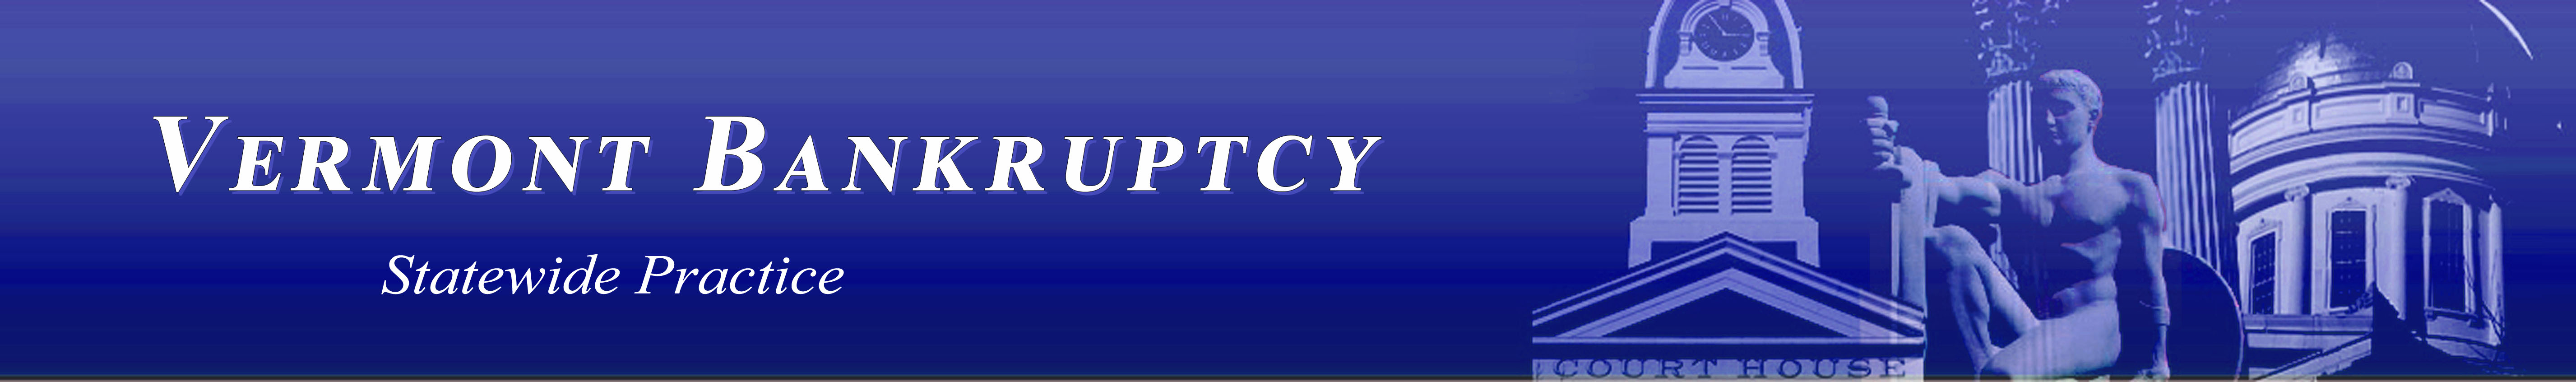 Vermont Bankruptcy Law Office